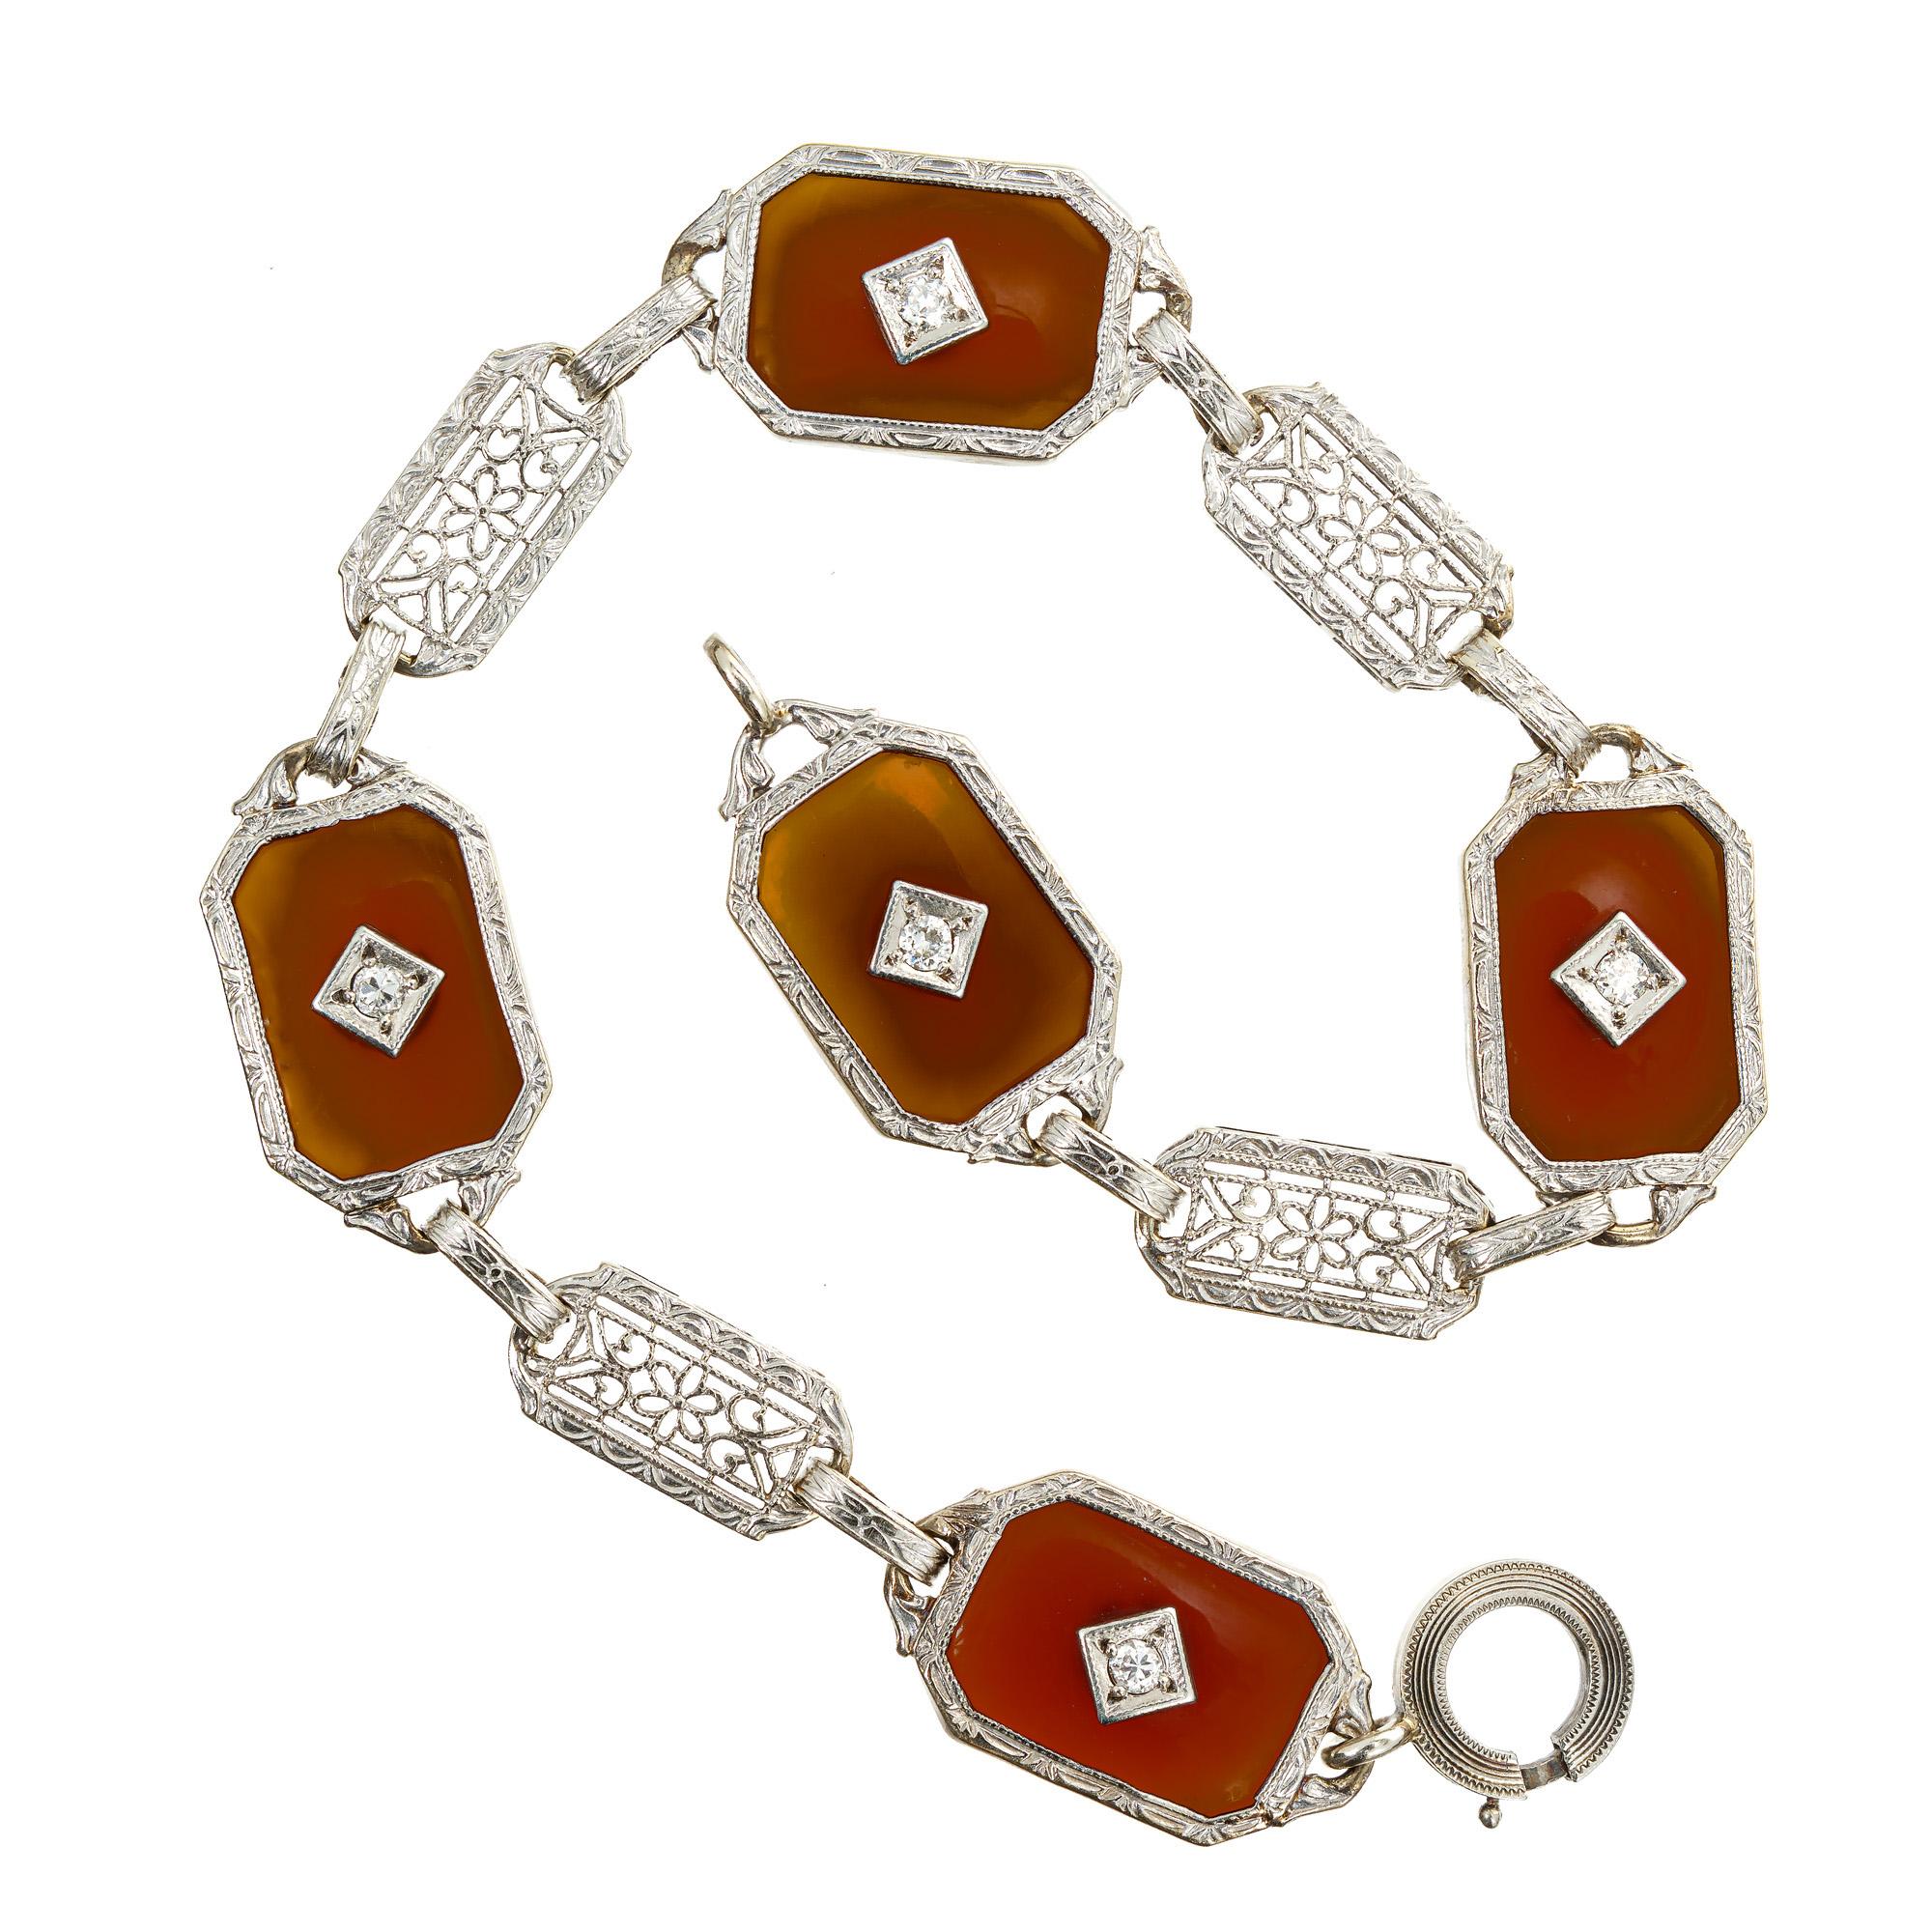 Carnelian diamond filigree 14k white gold bracelet. 5 round full cut diamonds set in 5 translucent brown carnelians. 7.25 inches in length.  Circa 1930-1940.

5 round full cut diamonds, approx. total weight .20cts, G, VS
5 translucent brown